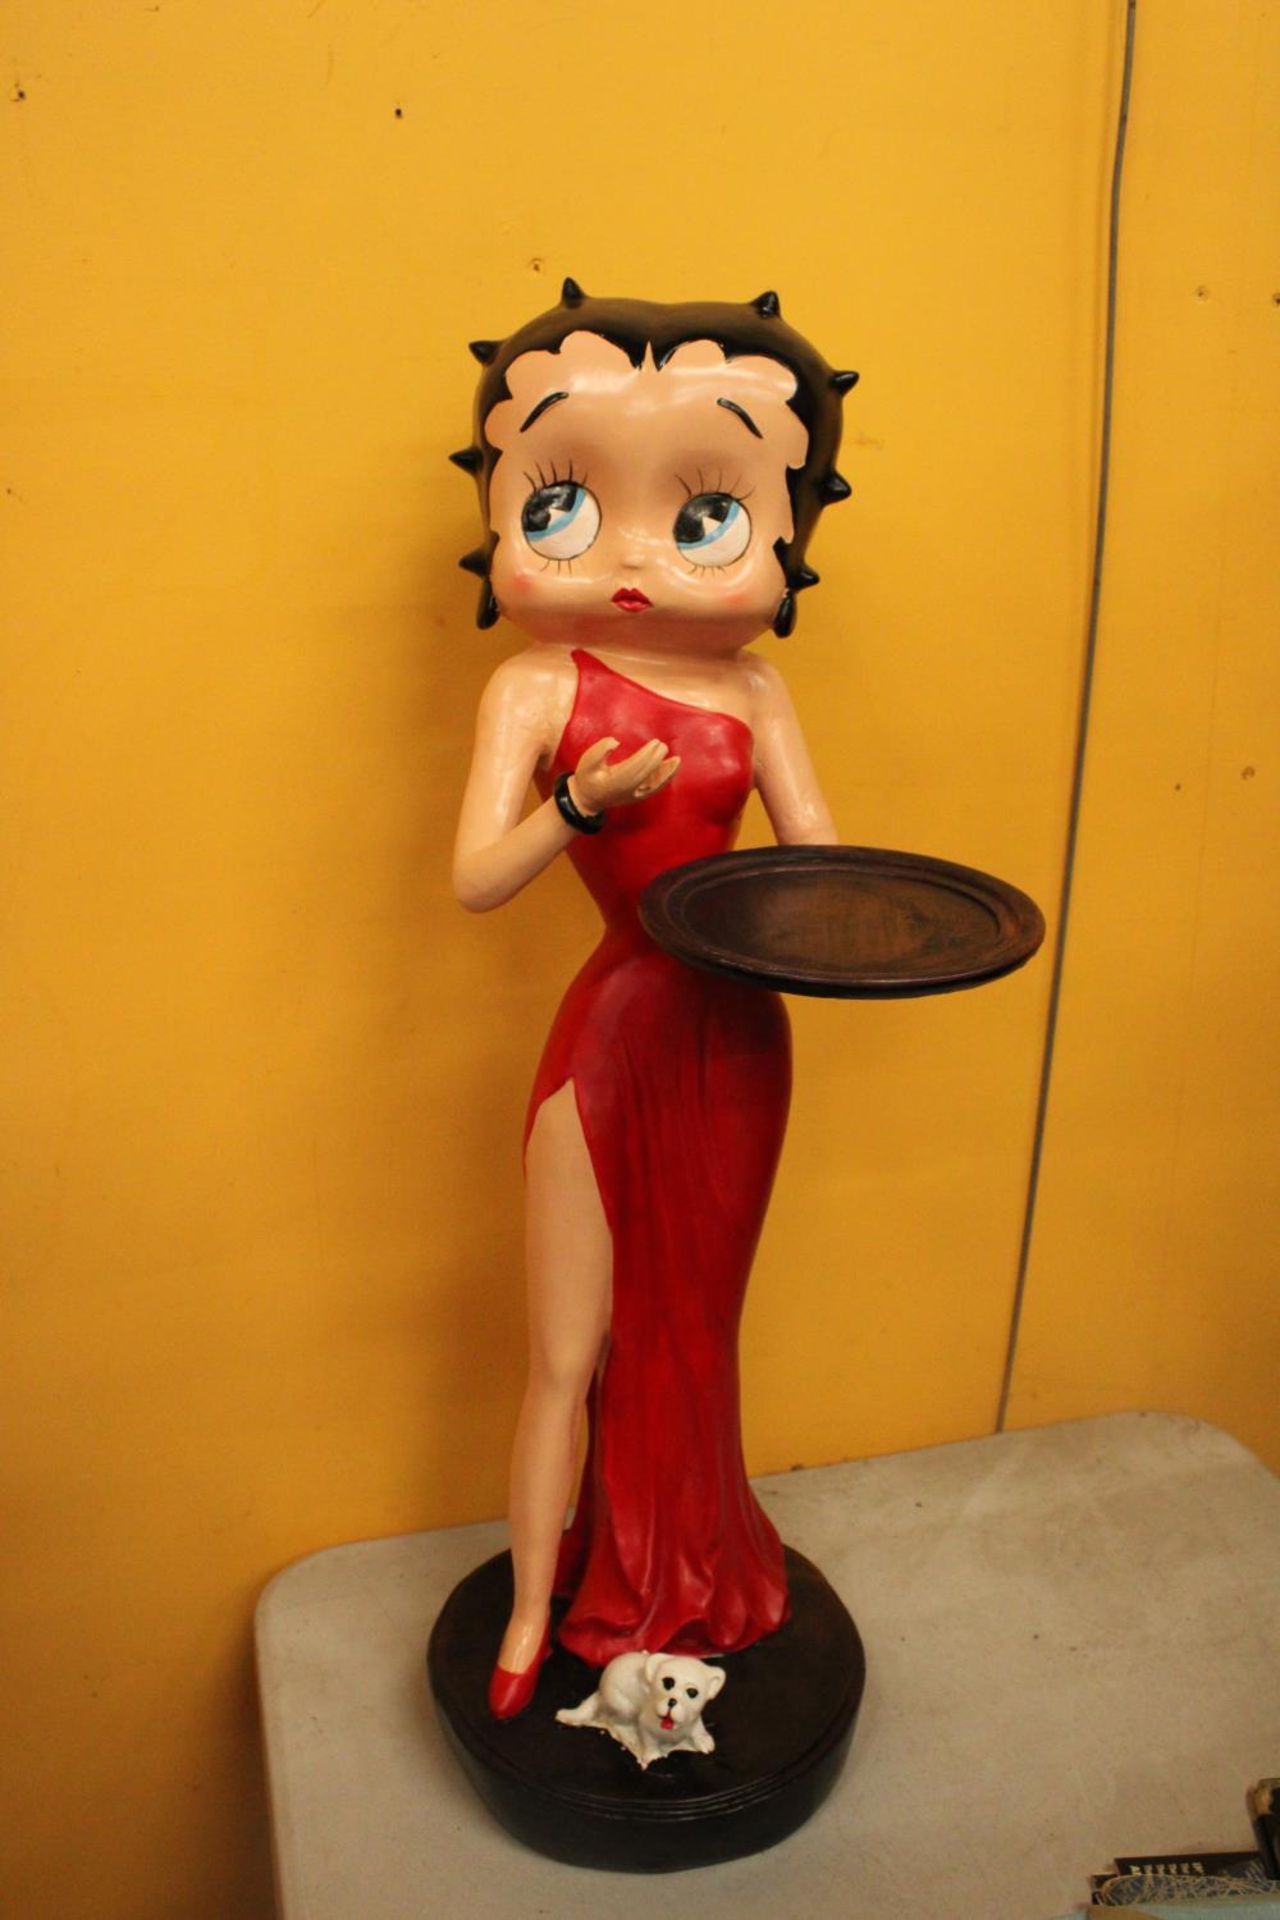 A DUMB WAITER IN THE STYLE OF A BETTY BOO WAITRESS FIGURE